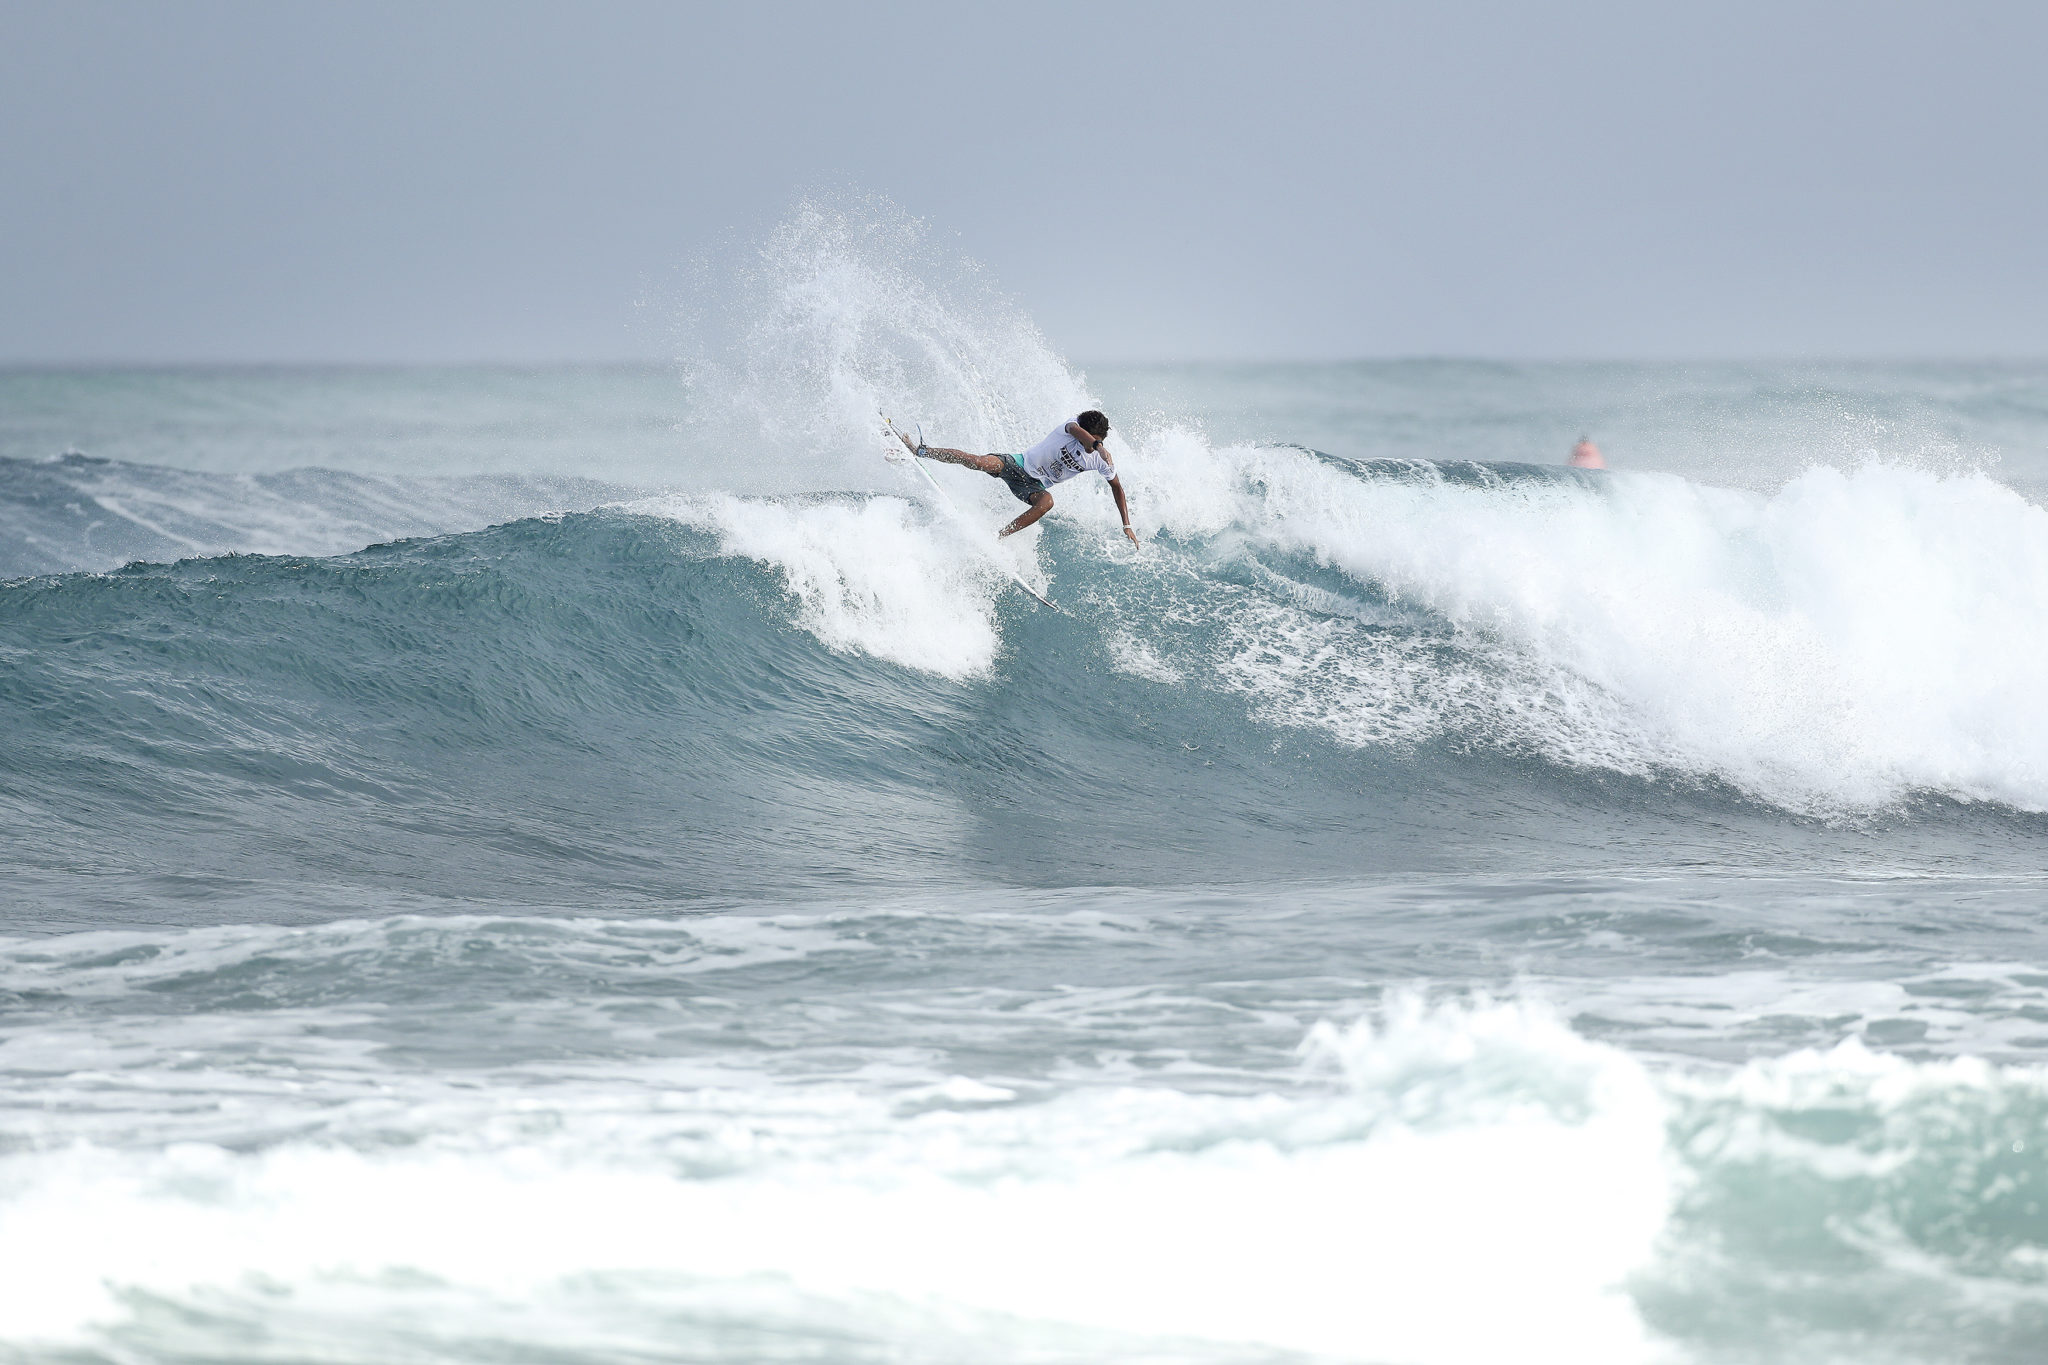 Samuel Pupo placed second in Heat 4 of Round Three at the Hawaiian Pro at Haleiwa, Hawaii today.